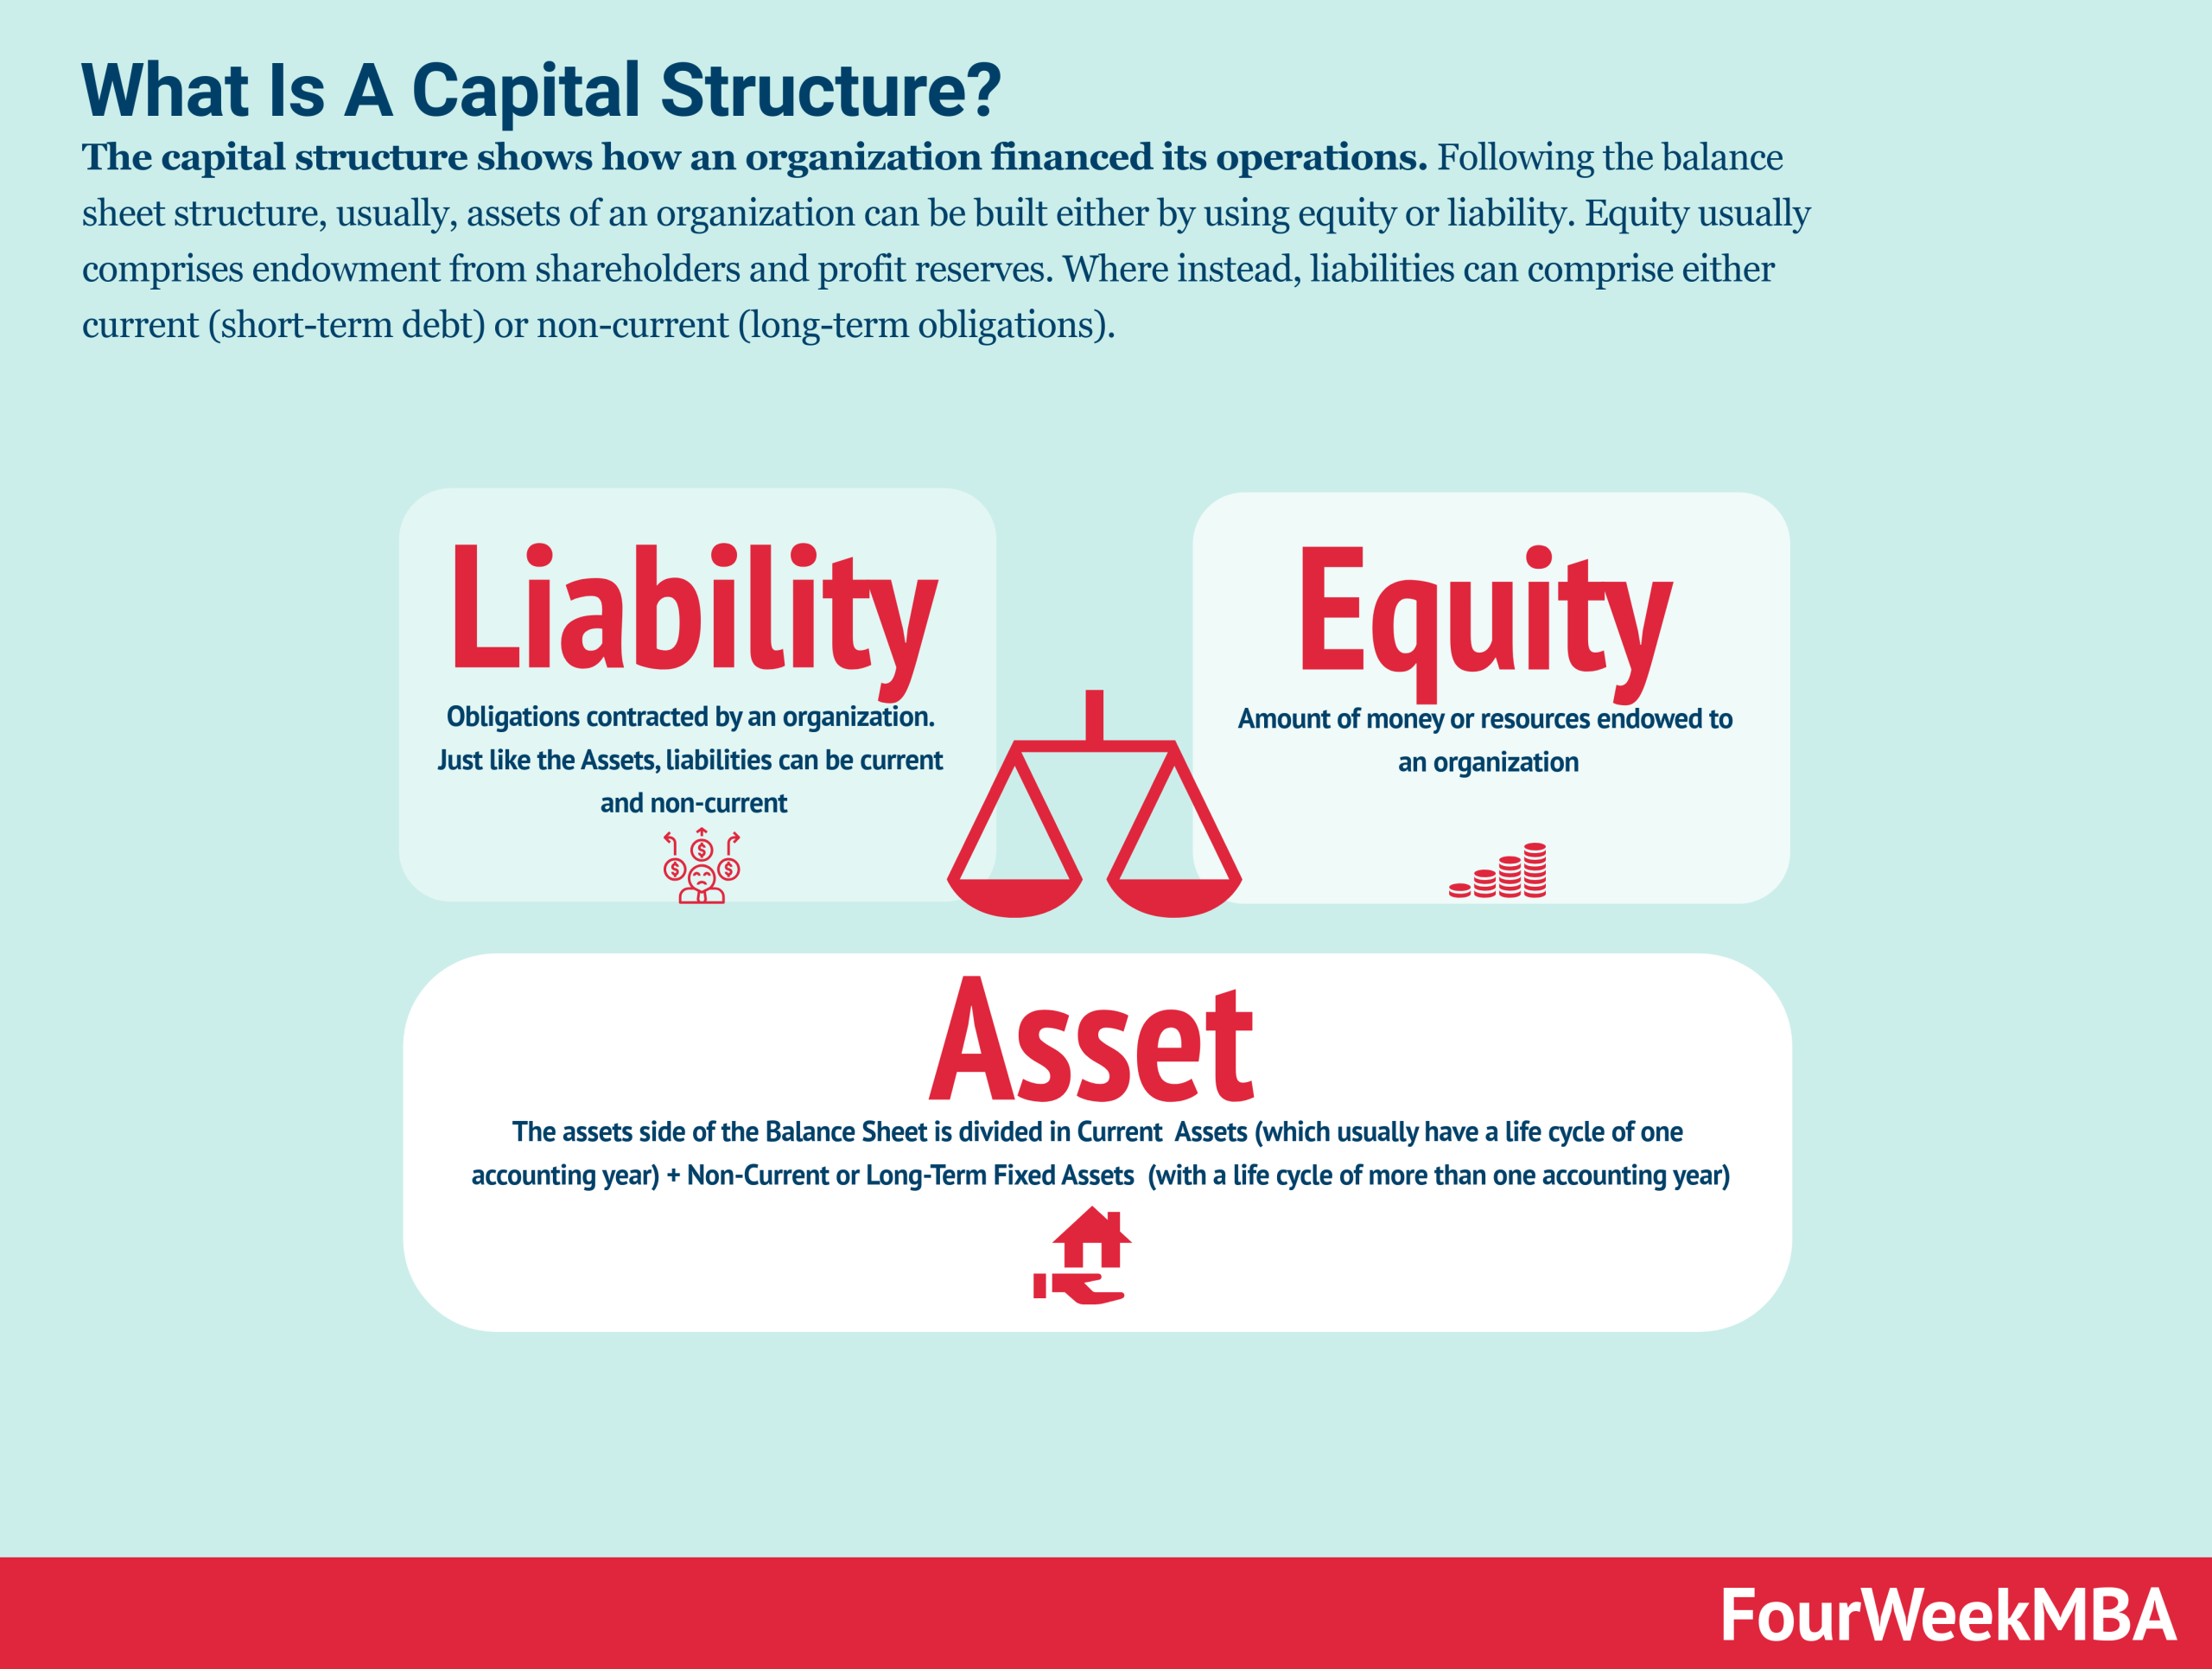 essay questions on capital structure